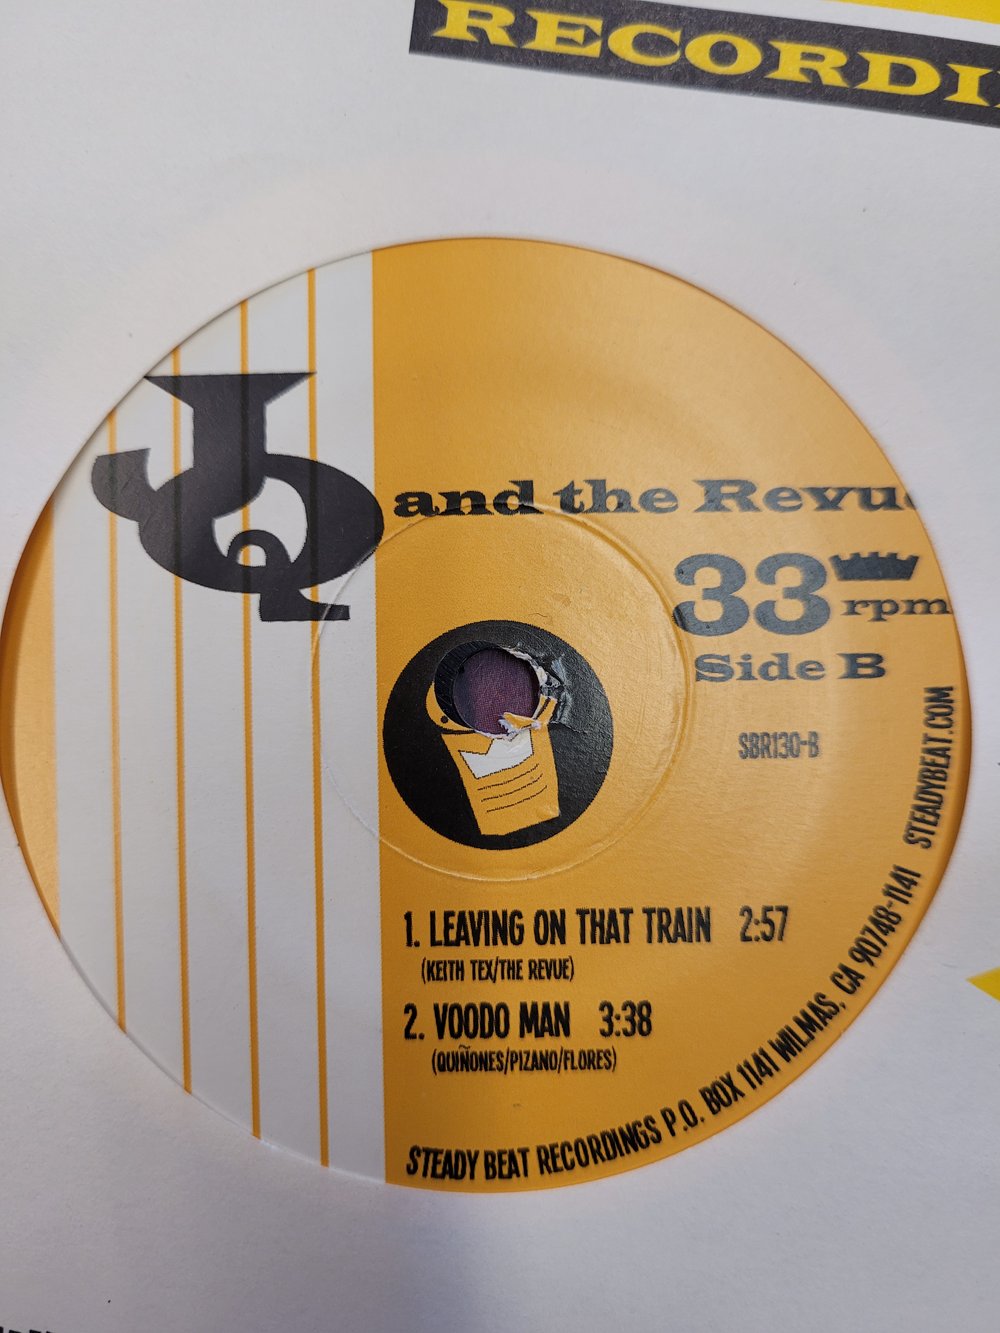 JQ & The Revue 7" 4 song EP 